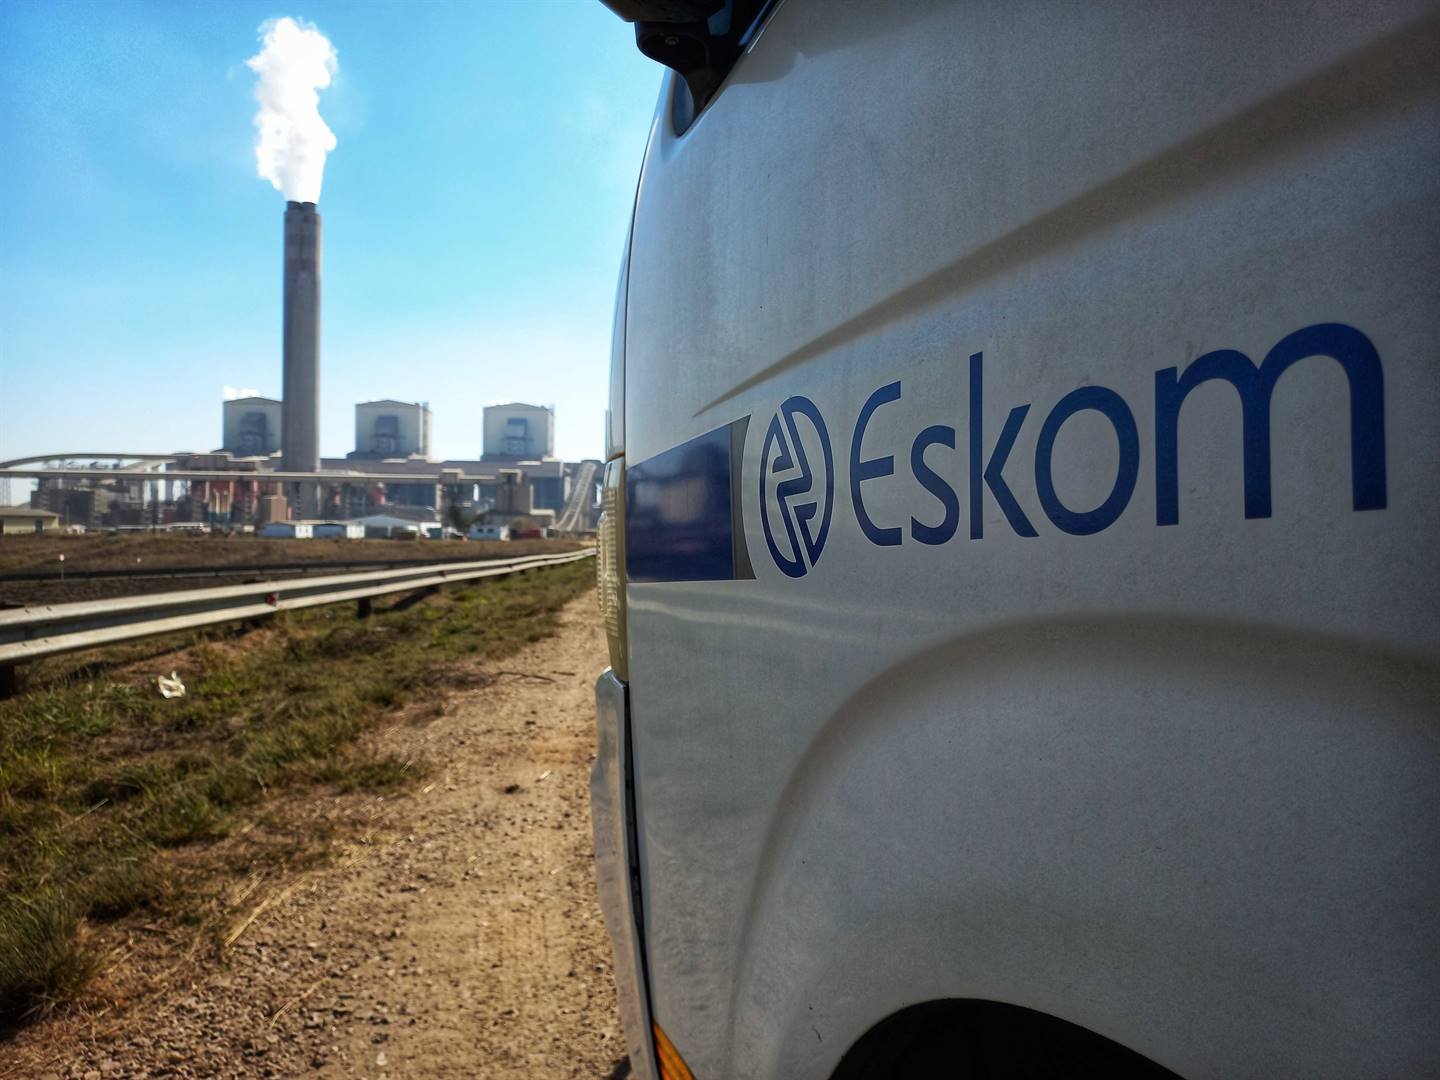 Eskom made its biggest loss ever in the last financial year.